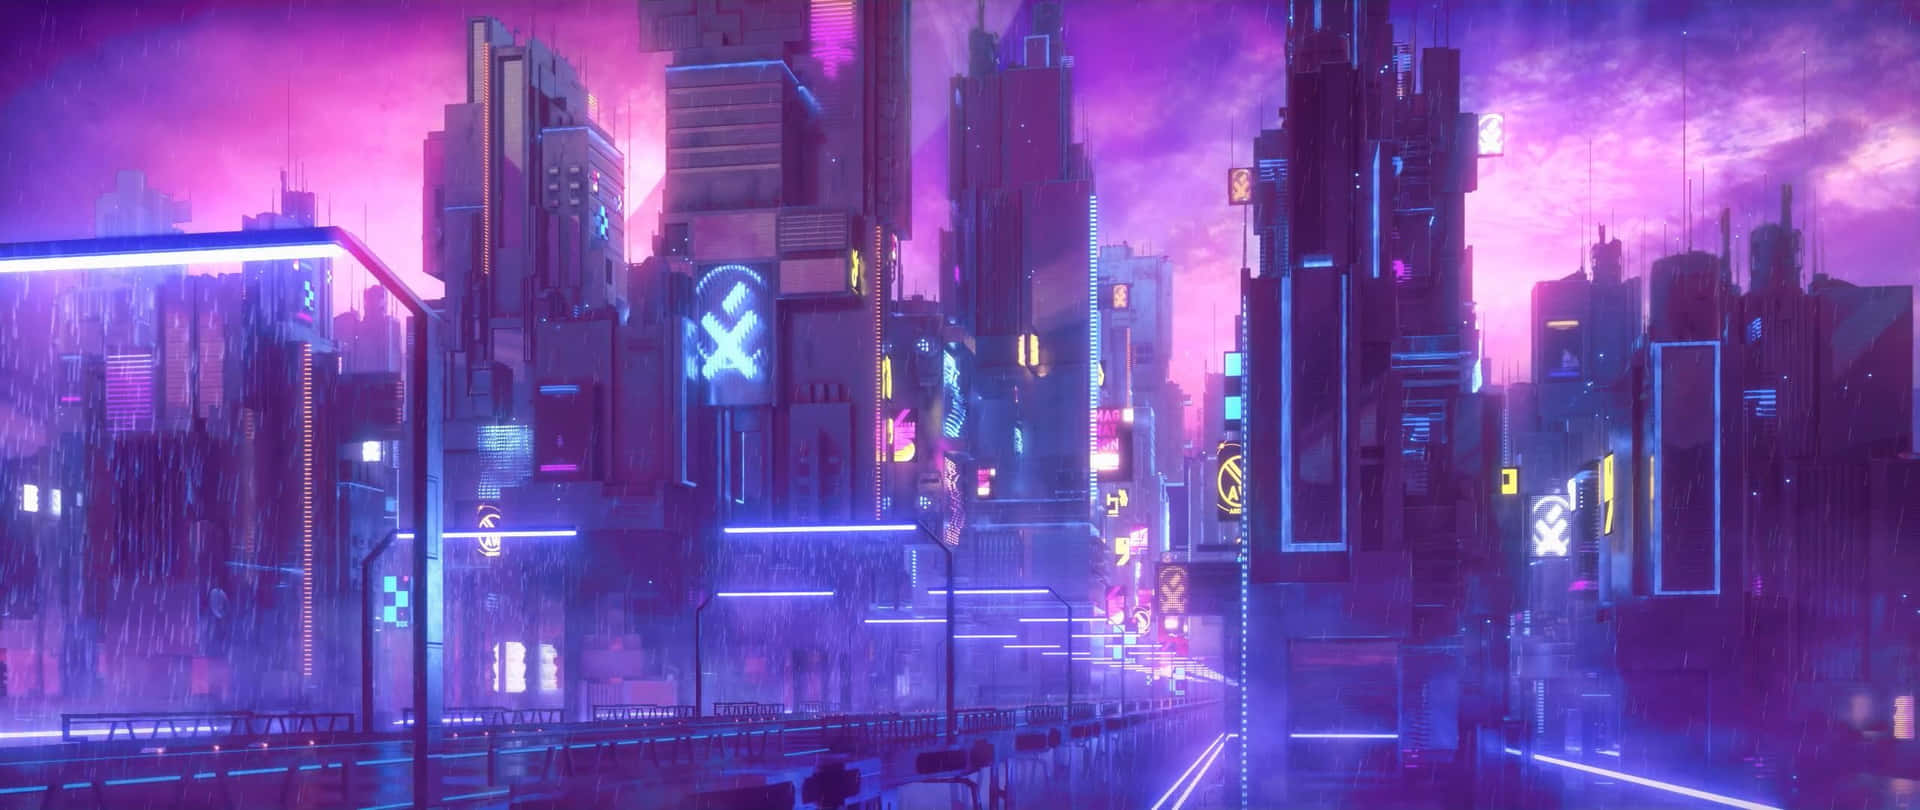 Futuristic cityscape with glowing neon lights Wallpaper